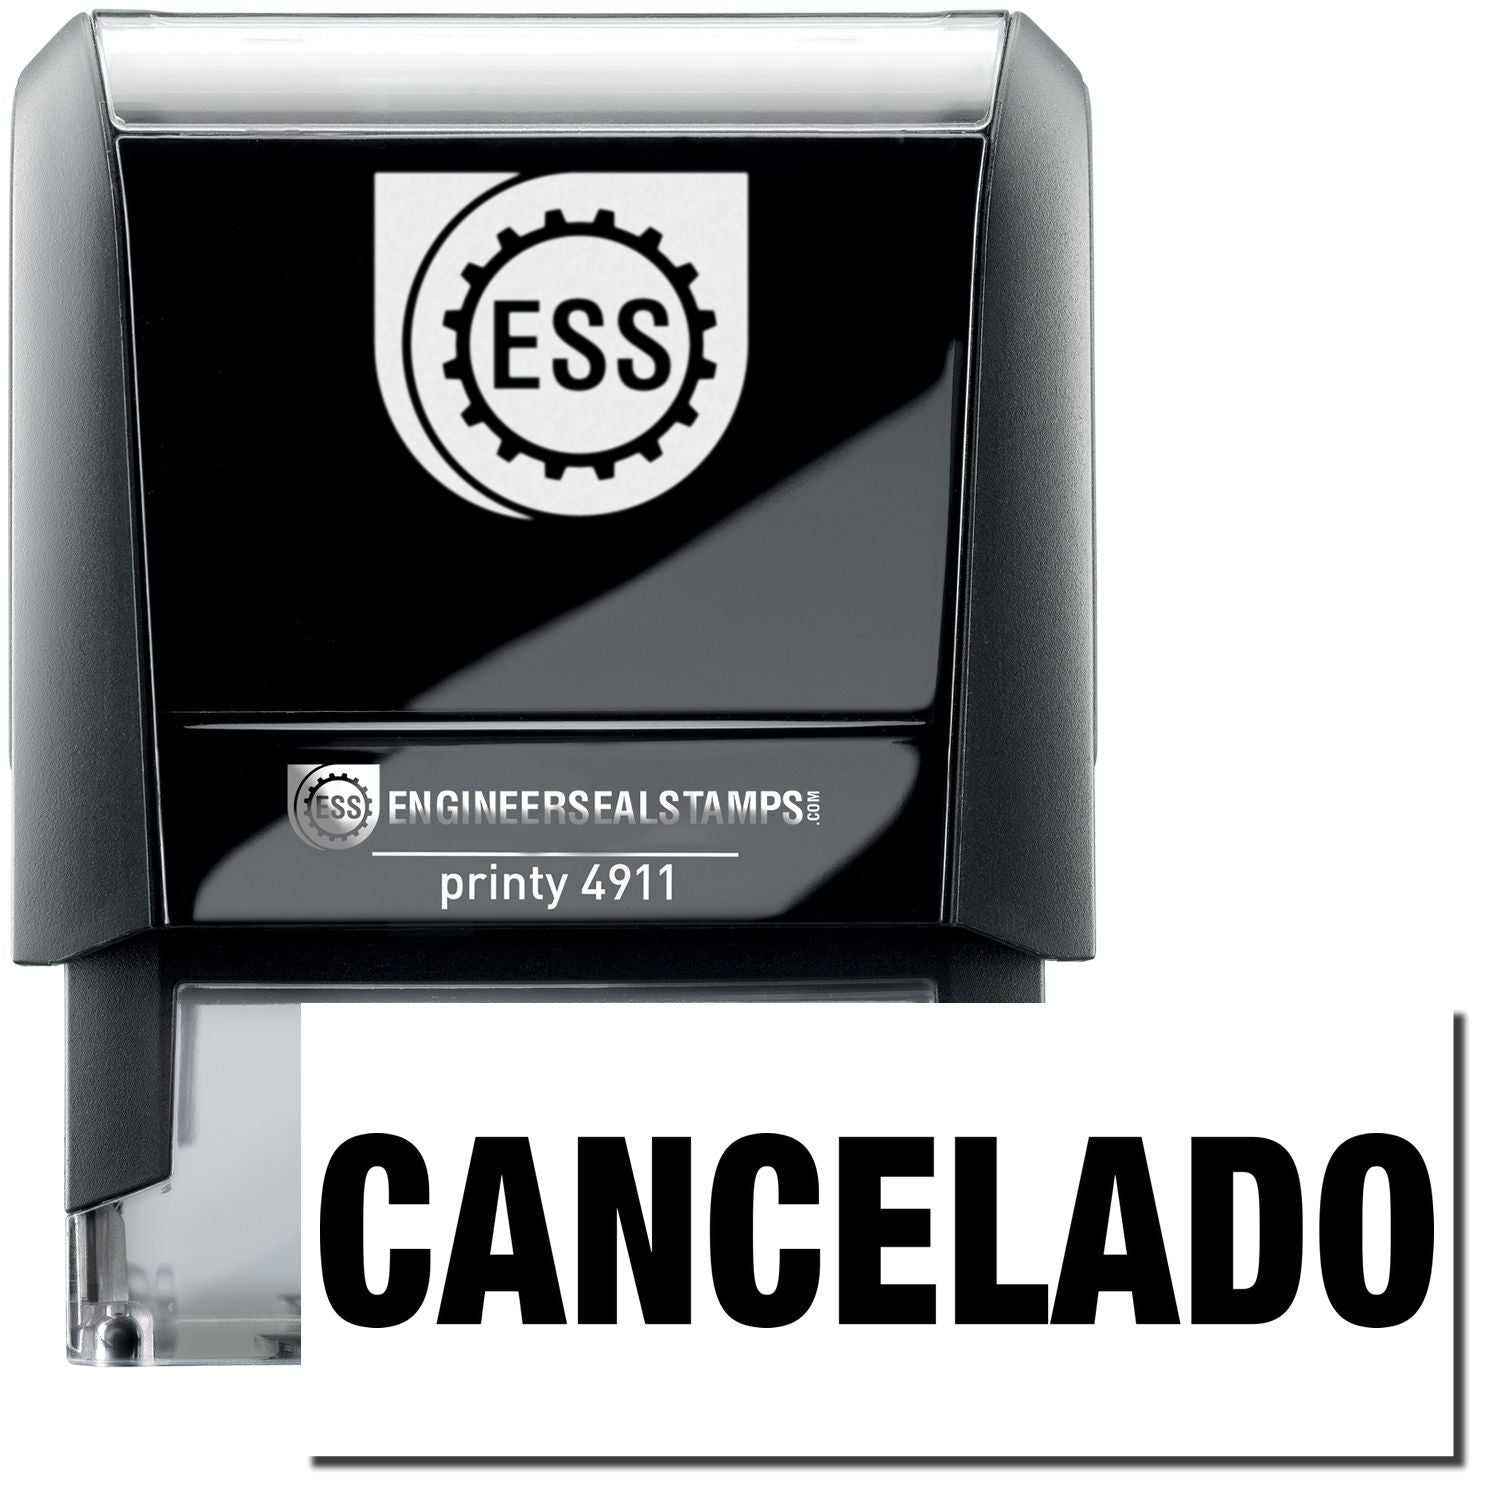 A self-inking stamp with a stamped image showing how the text "CANCELADO" is displayed after stamping.